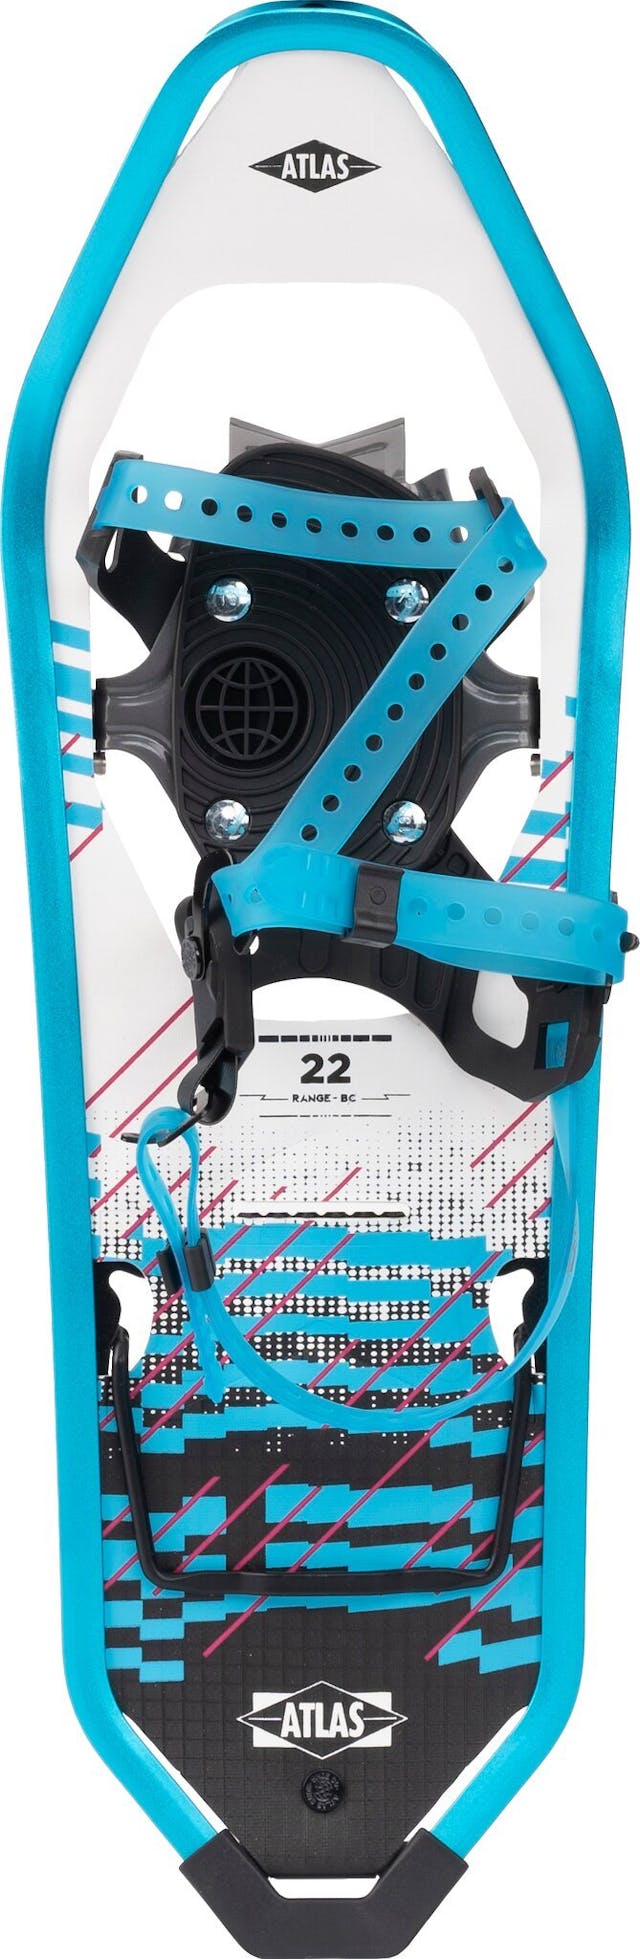 Product image for Range-BC 22 inches Backcountry Snowshoes - Women's